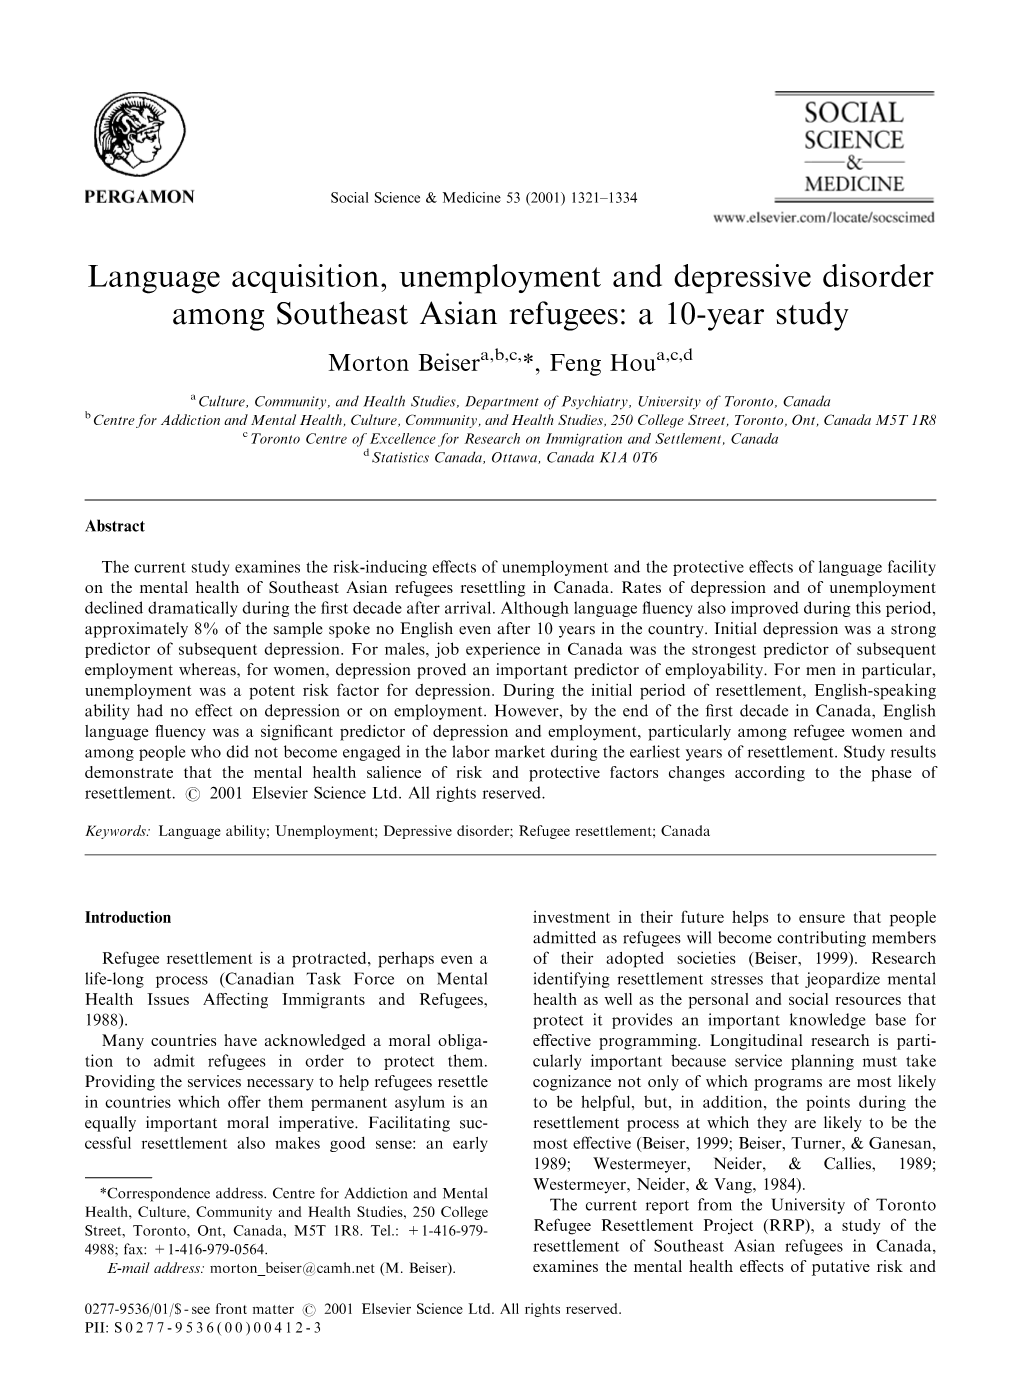 Language Acquisition, Unemployment and Depressive Disorder Among Southeast Asian Refugees: a 10-Year Study Morton Beisera,B,C,*, Feng Houa,C,D